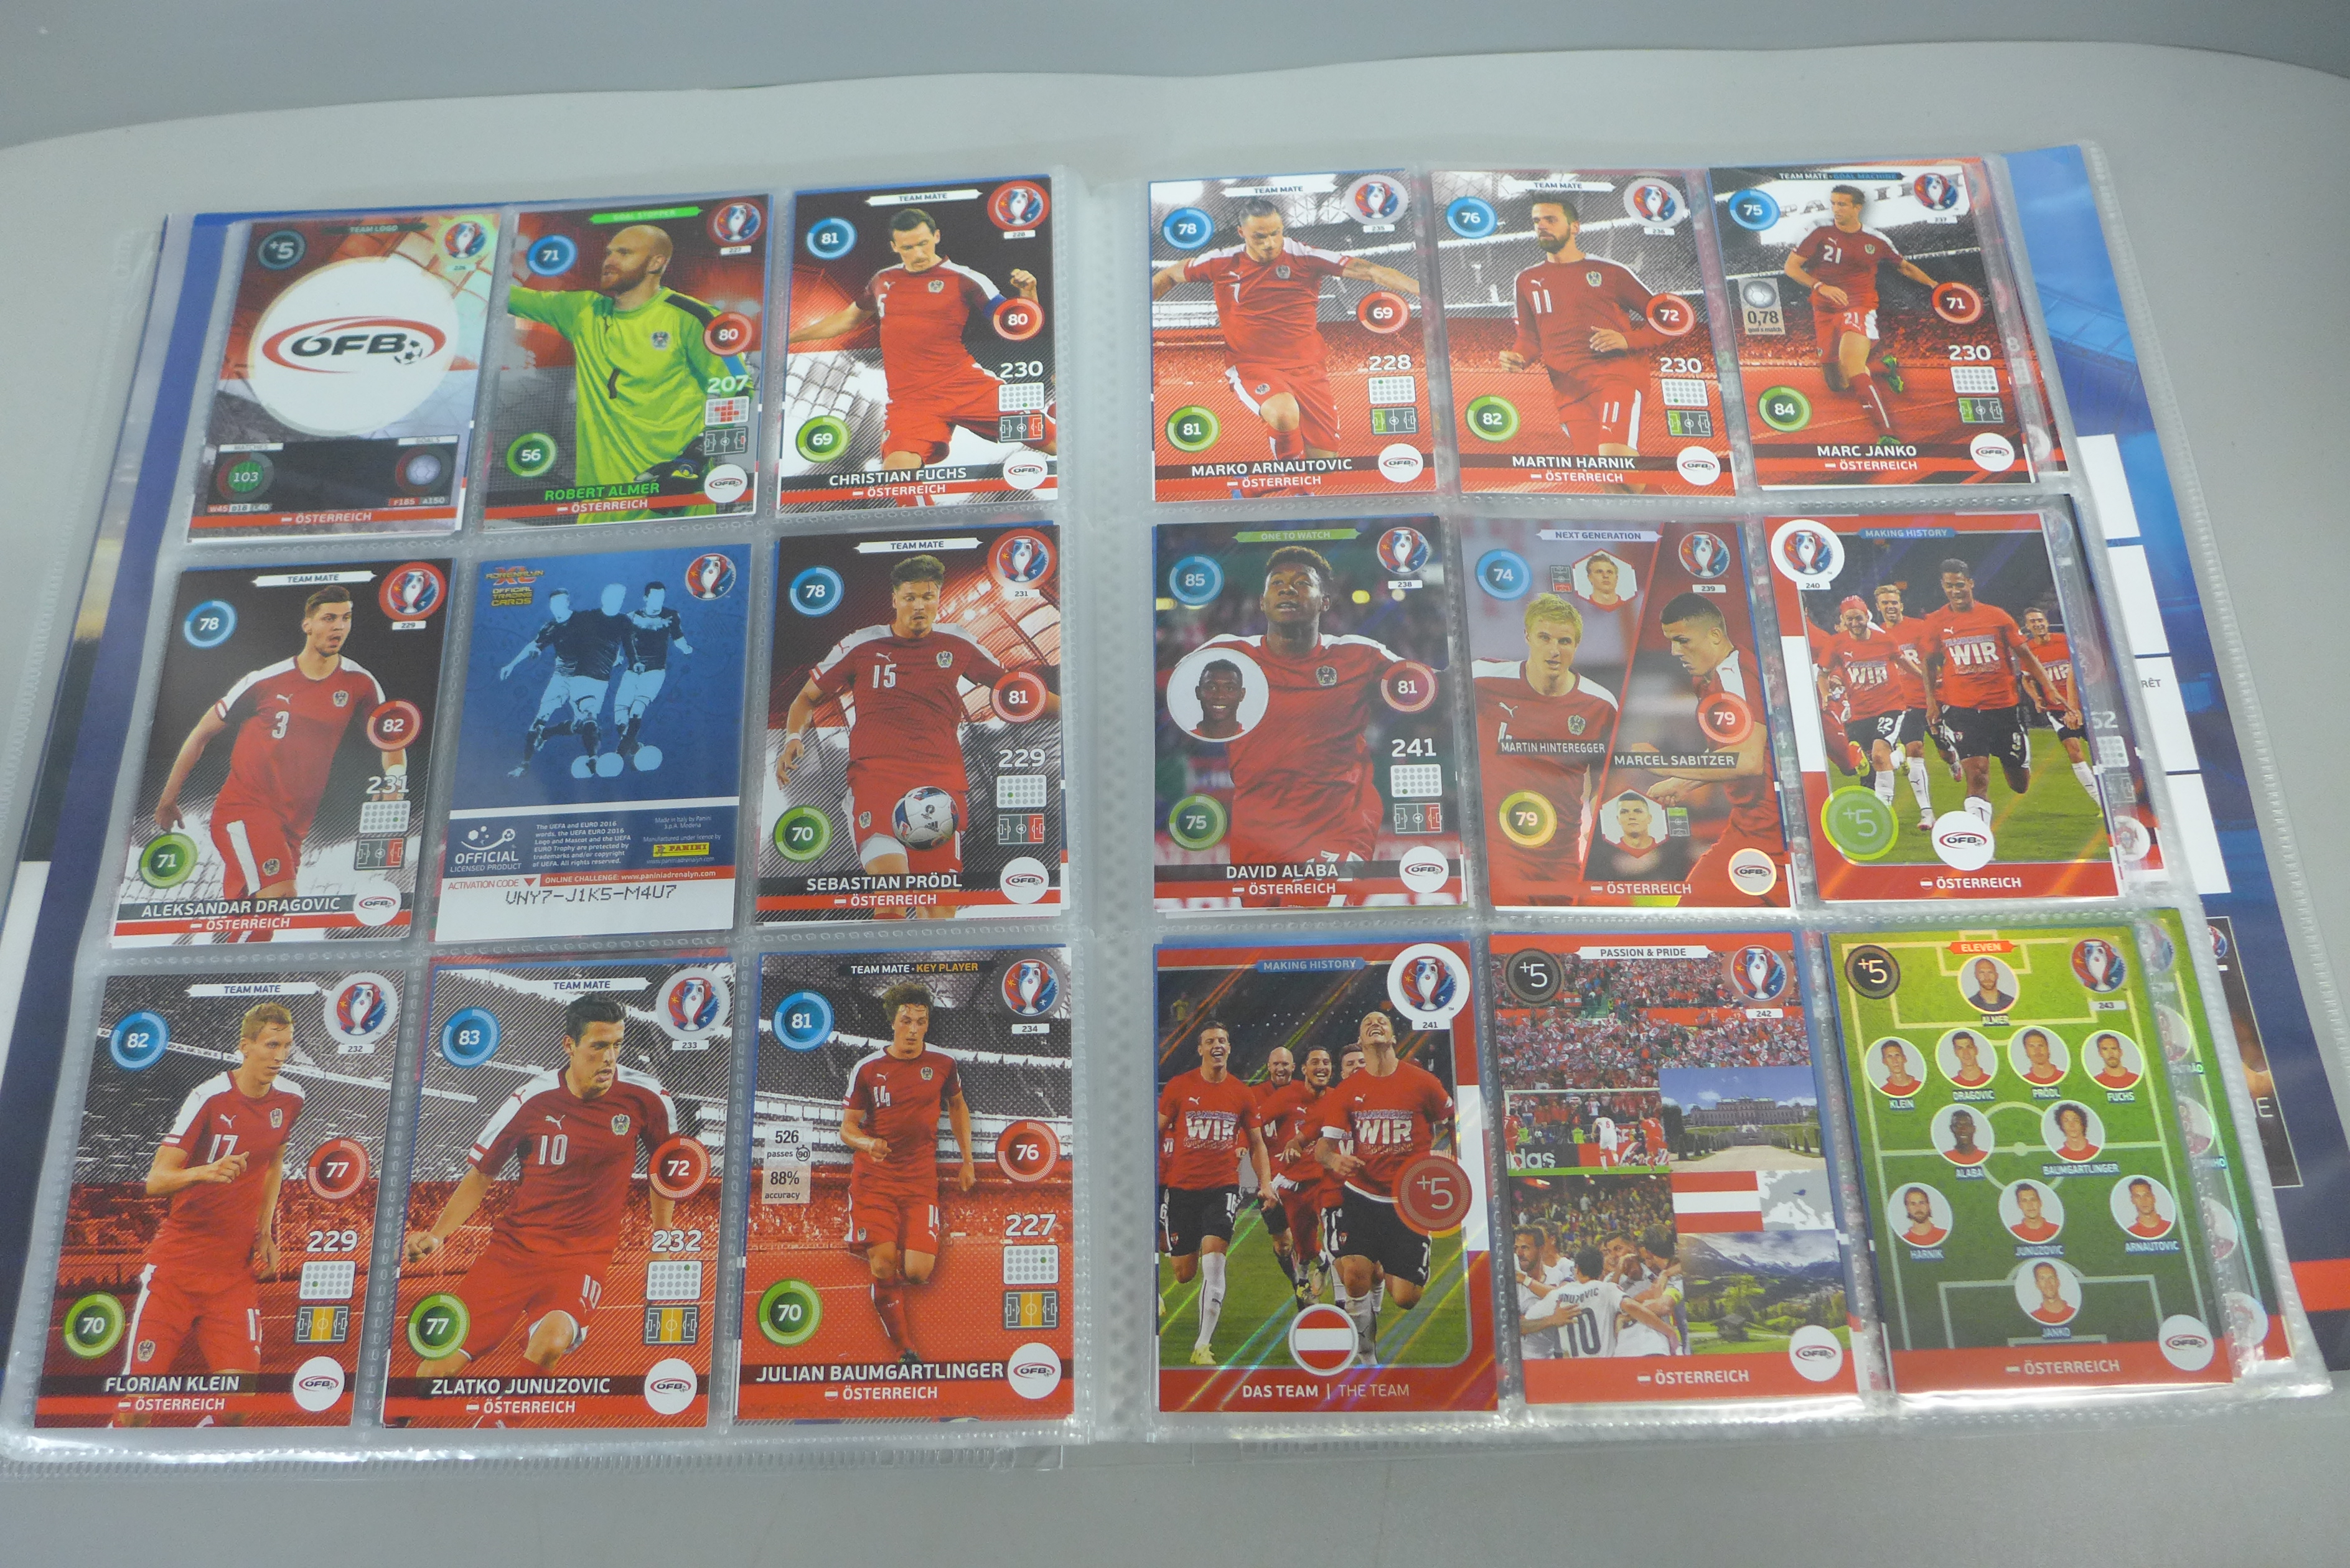 Euro 2016 Panini trading cards and album - Image 4 of 4